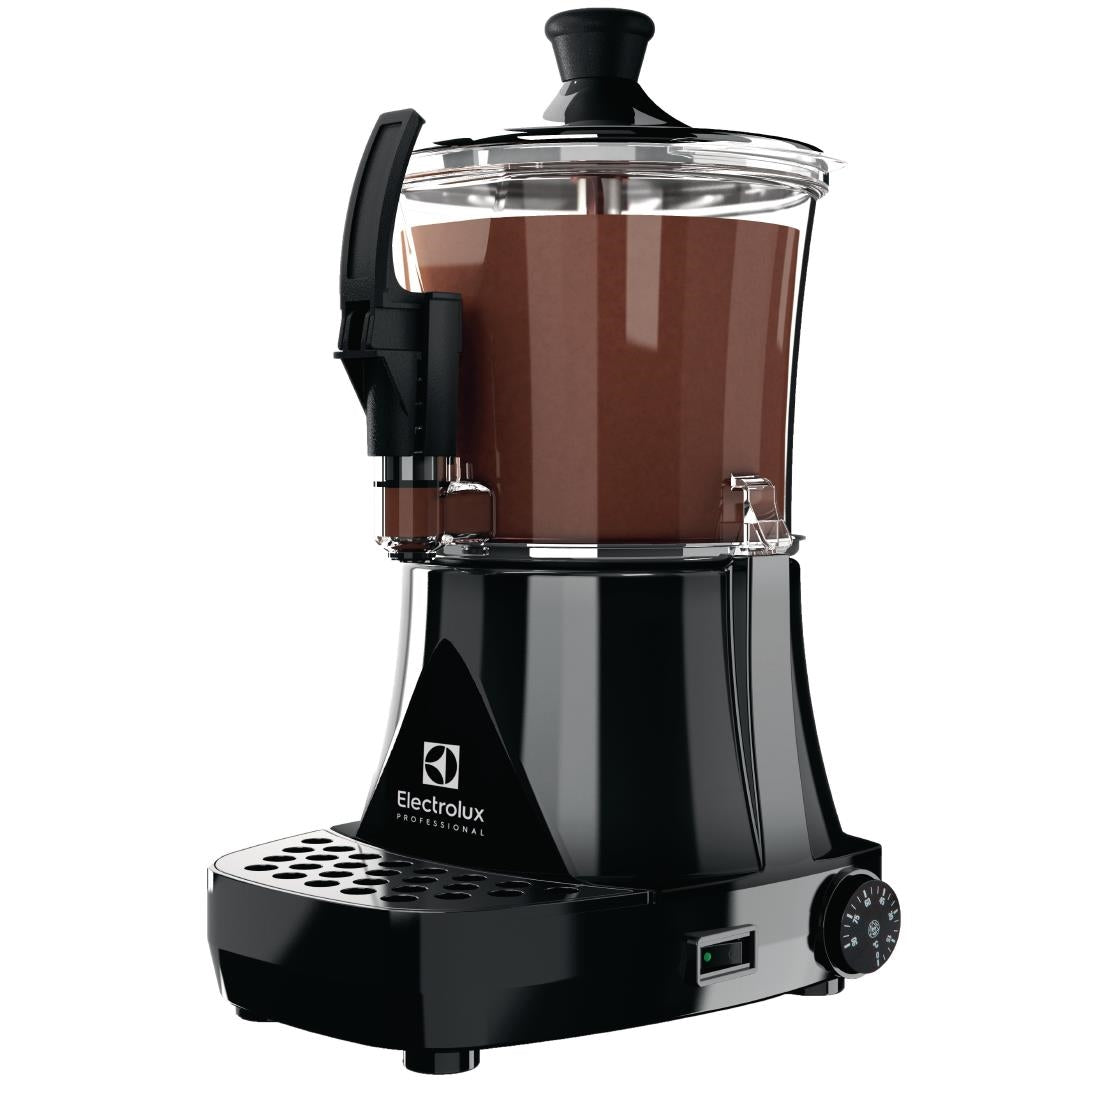 FW798 Electrolux Hot Chocolate Dispenser 3Ltr JD Catering Equipment Solutions Ltd